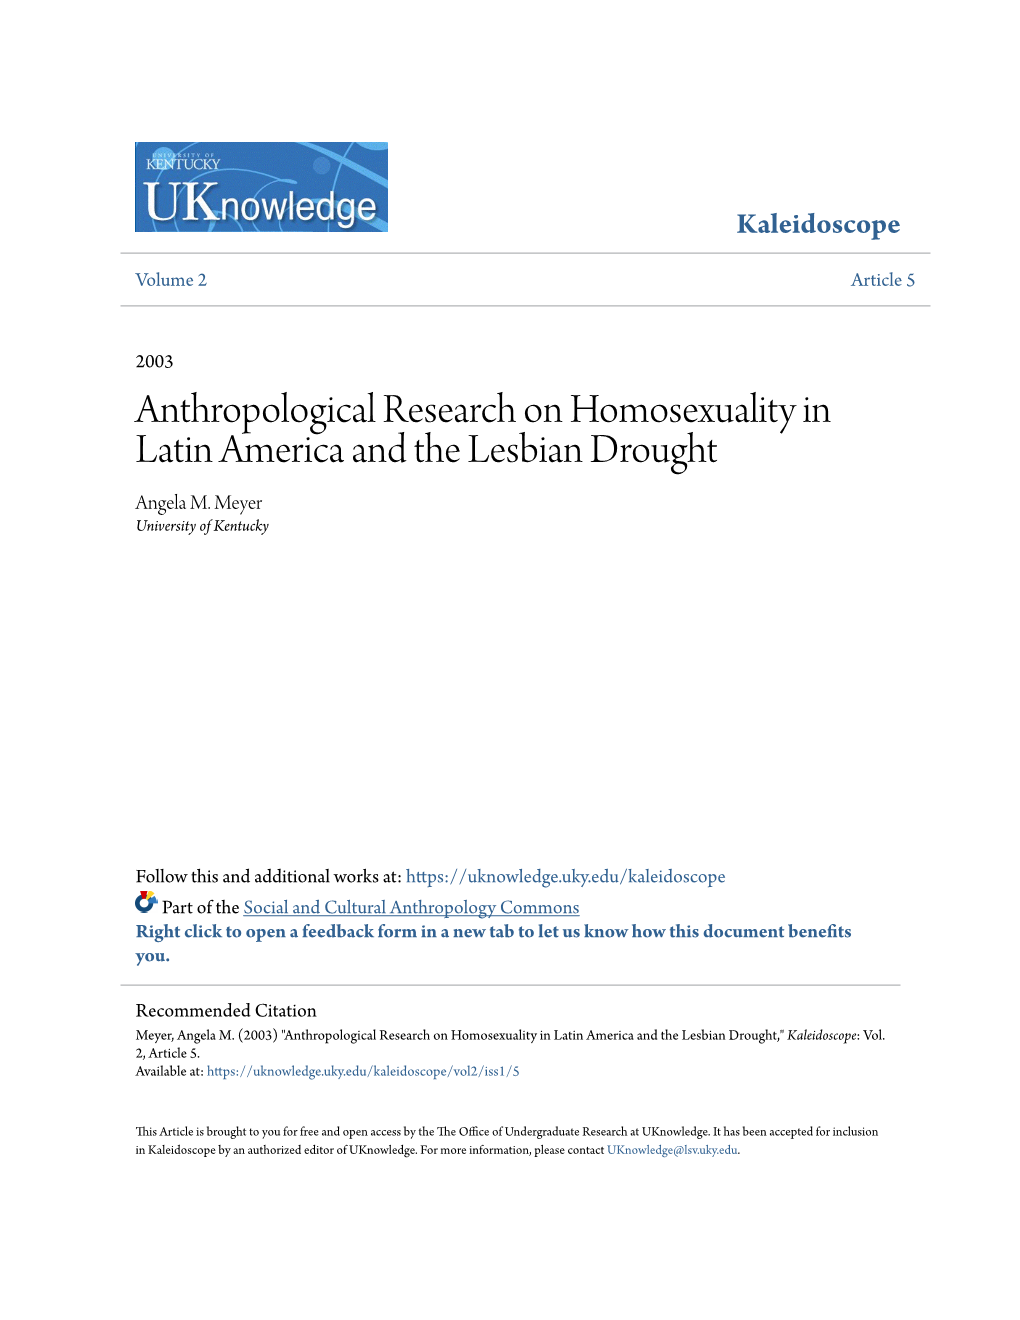 Anthropological Research on Homosexuality in Latin America and the Lesbian Drought Angela M